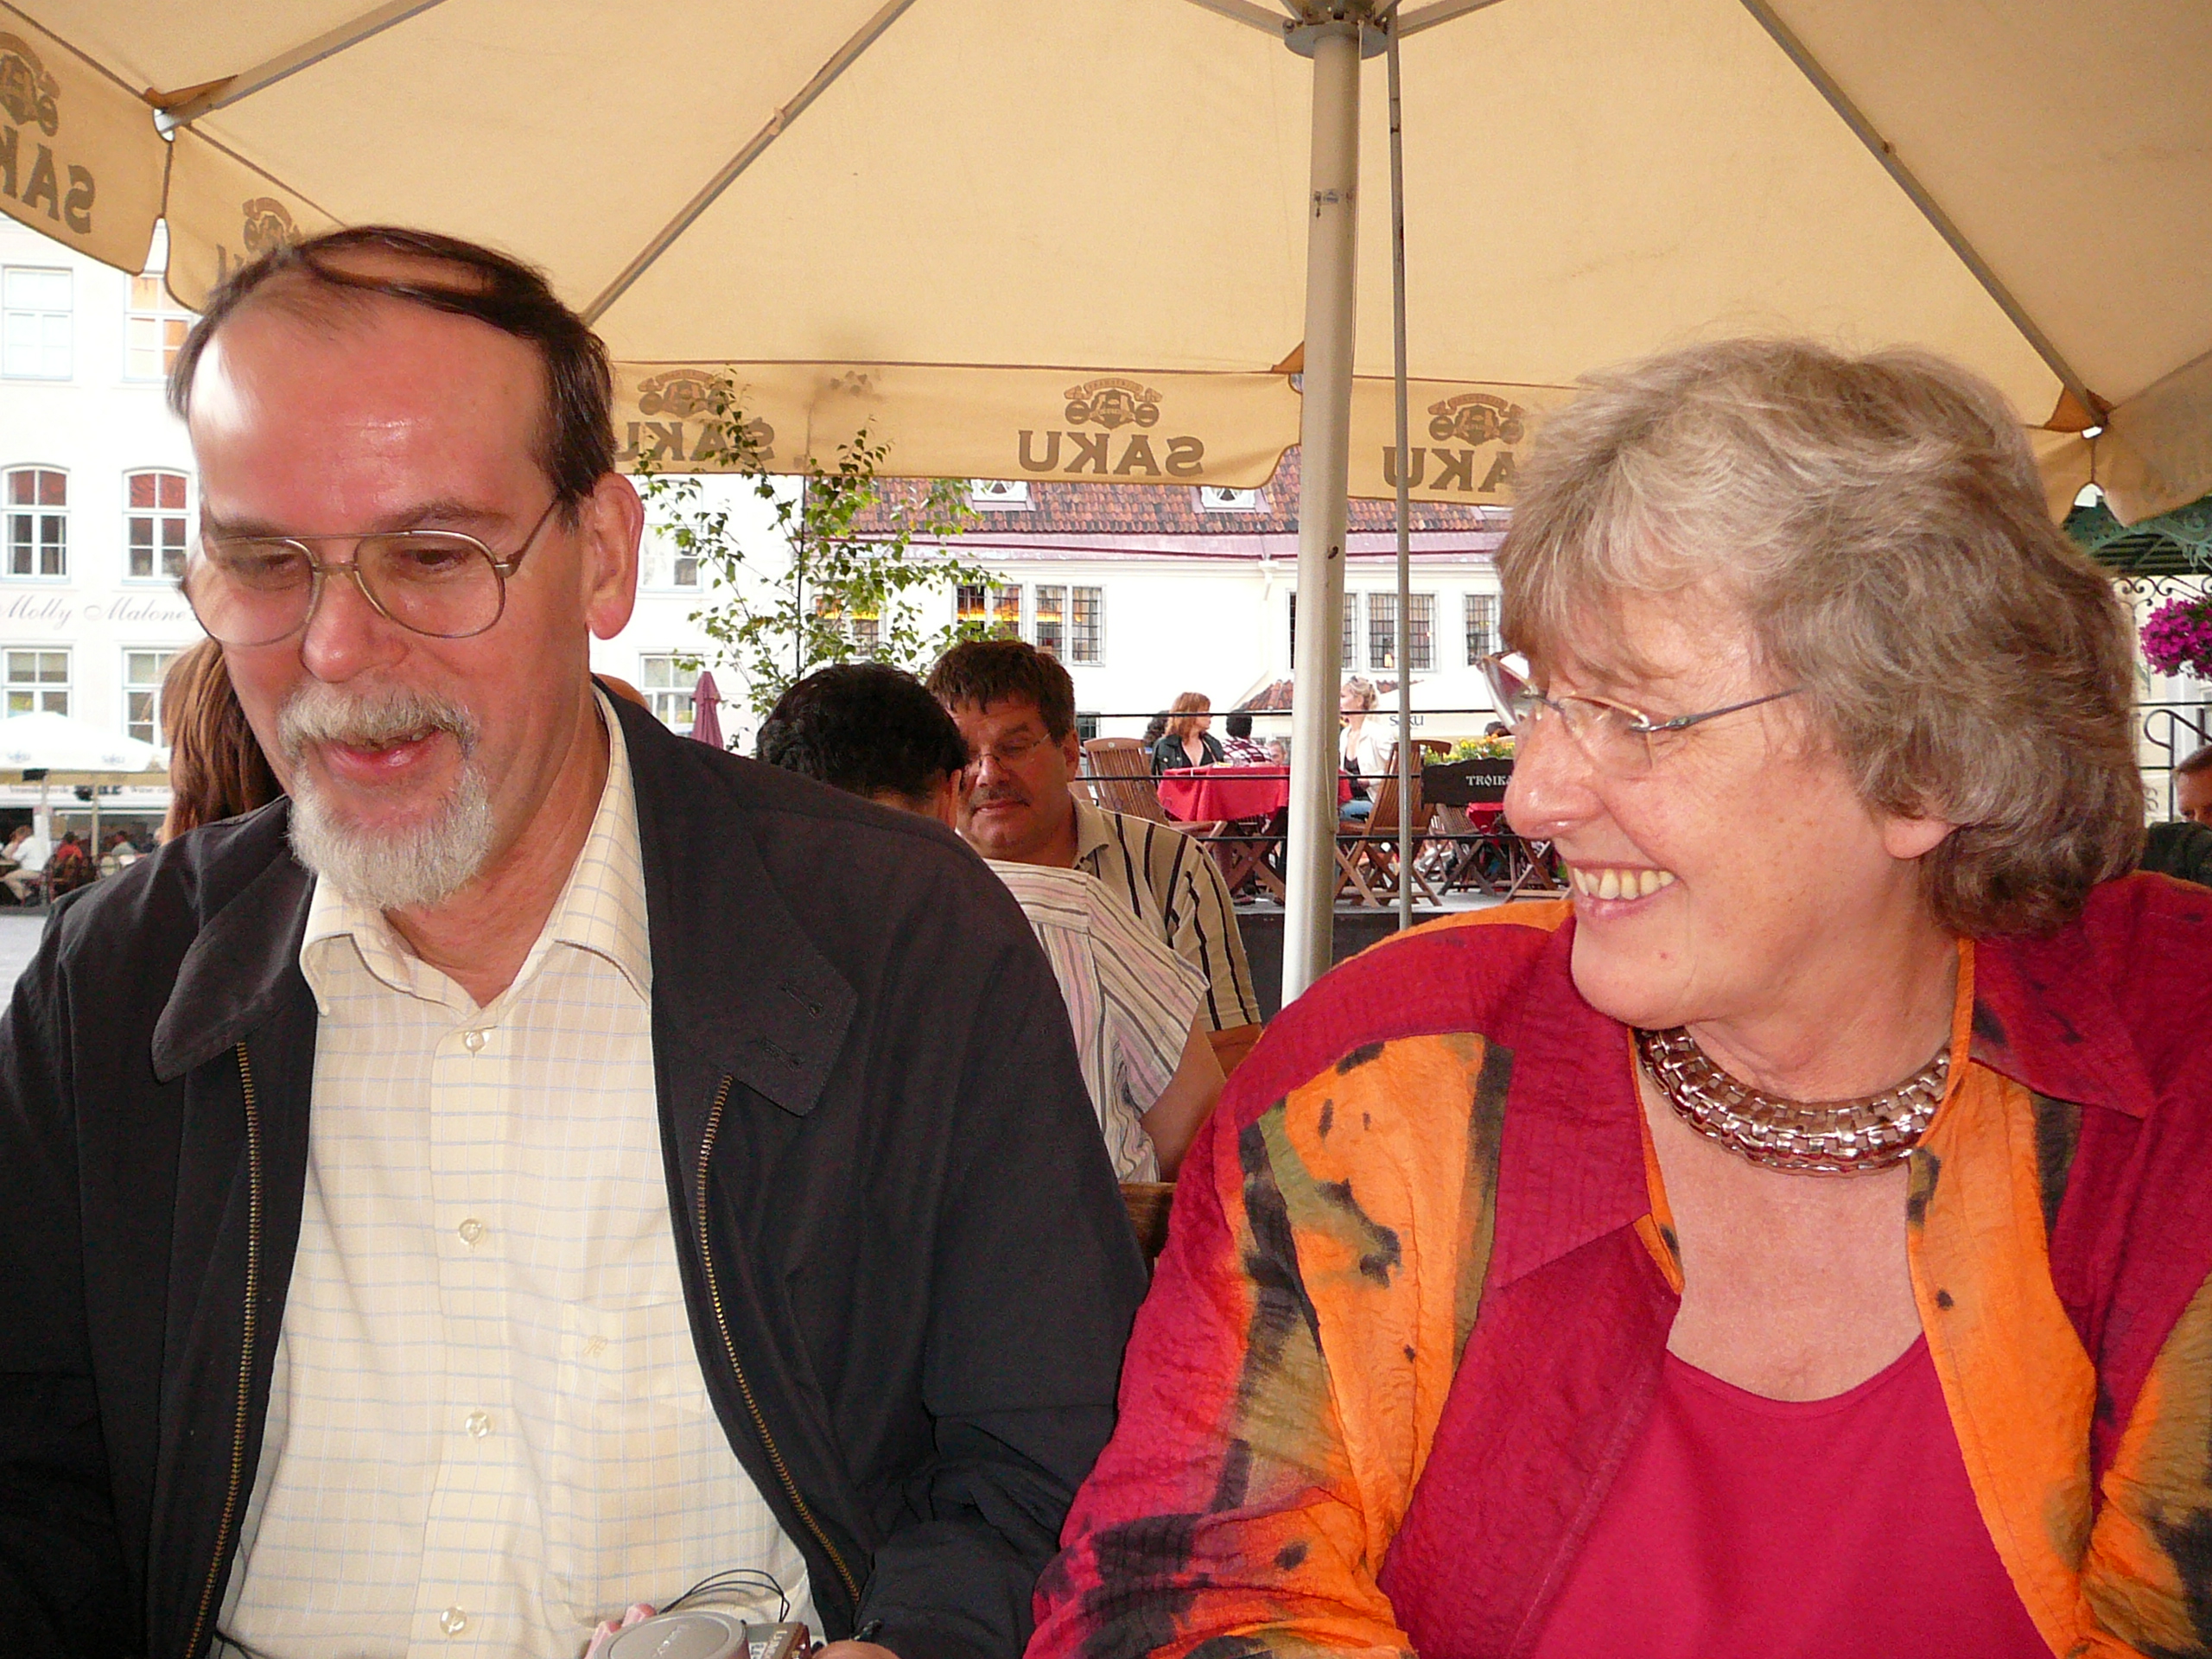 the author Michael Wieneke with his wife